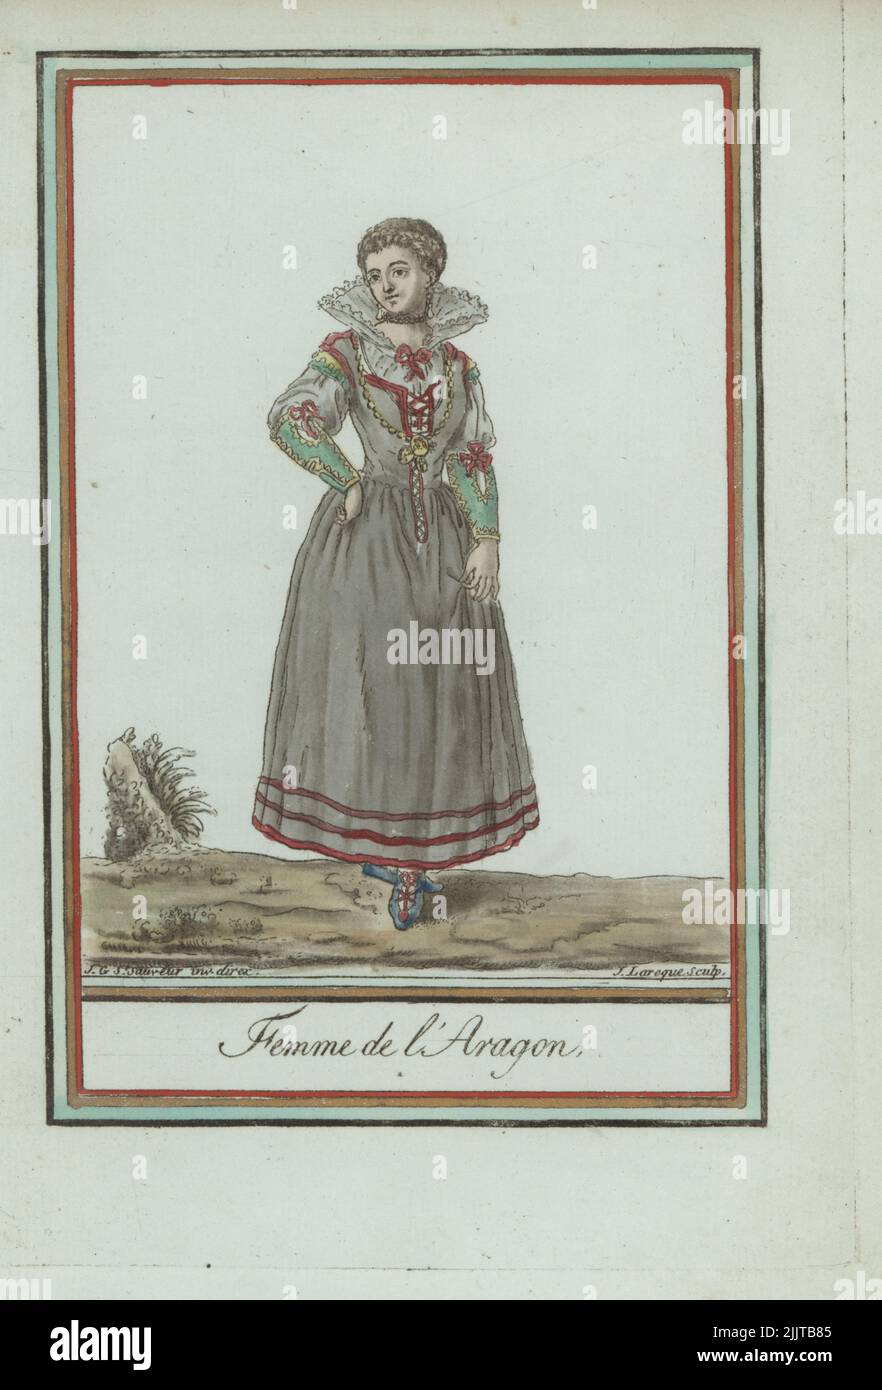 Woman of Aragon, Spain. In a gown with laced corset, contrasting amadis sleeves, full skirts, lace ruff collar standing up from the chemise. Femme de l'Aragon. Handcoloured copperplate engraving by J. Laroque after a design by Jacques Grasset de Saint-Sauveur from his Encyclopedie des voyages, Encyclopedia of Voyages, Bordeaux, France, 1792. Stock Photo